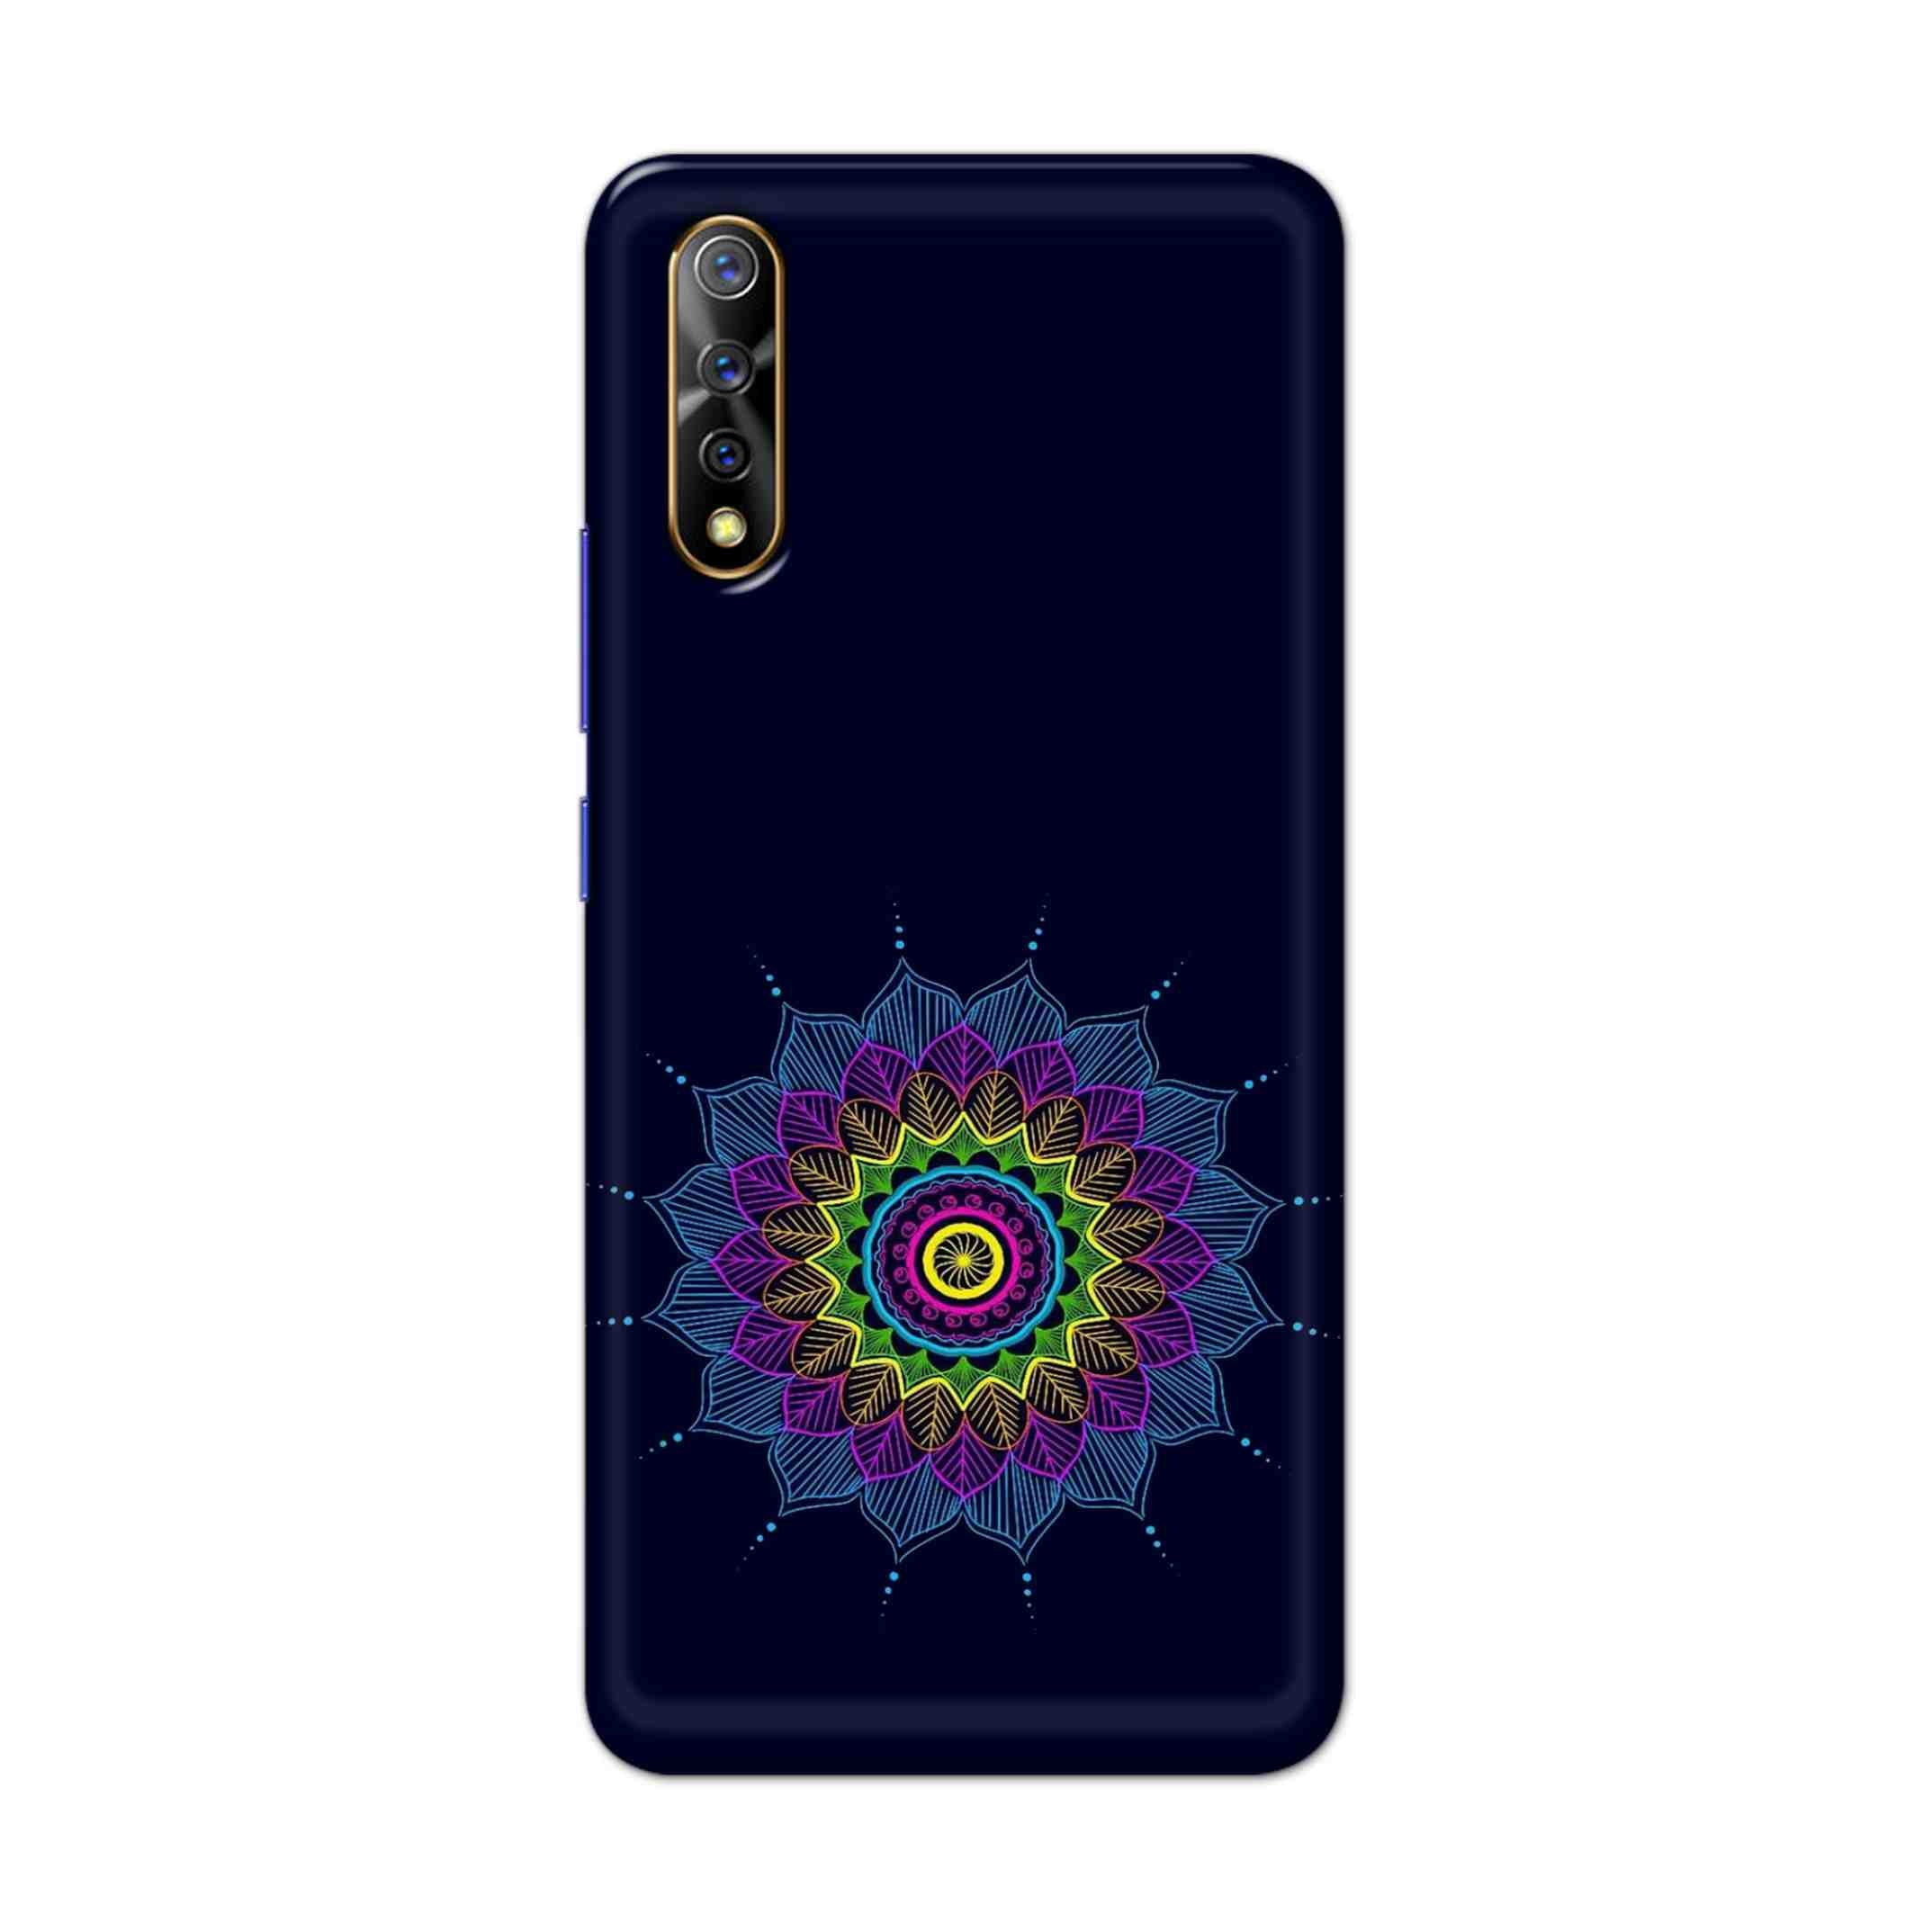 Buy Jung And Mandalas Hard Back Mobile Phone Case Cover For Vivo S1 / Z1x Online